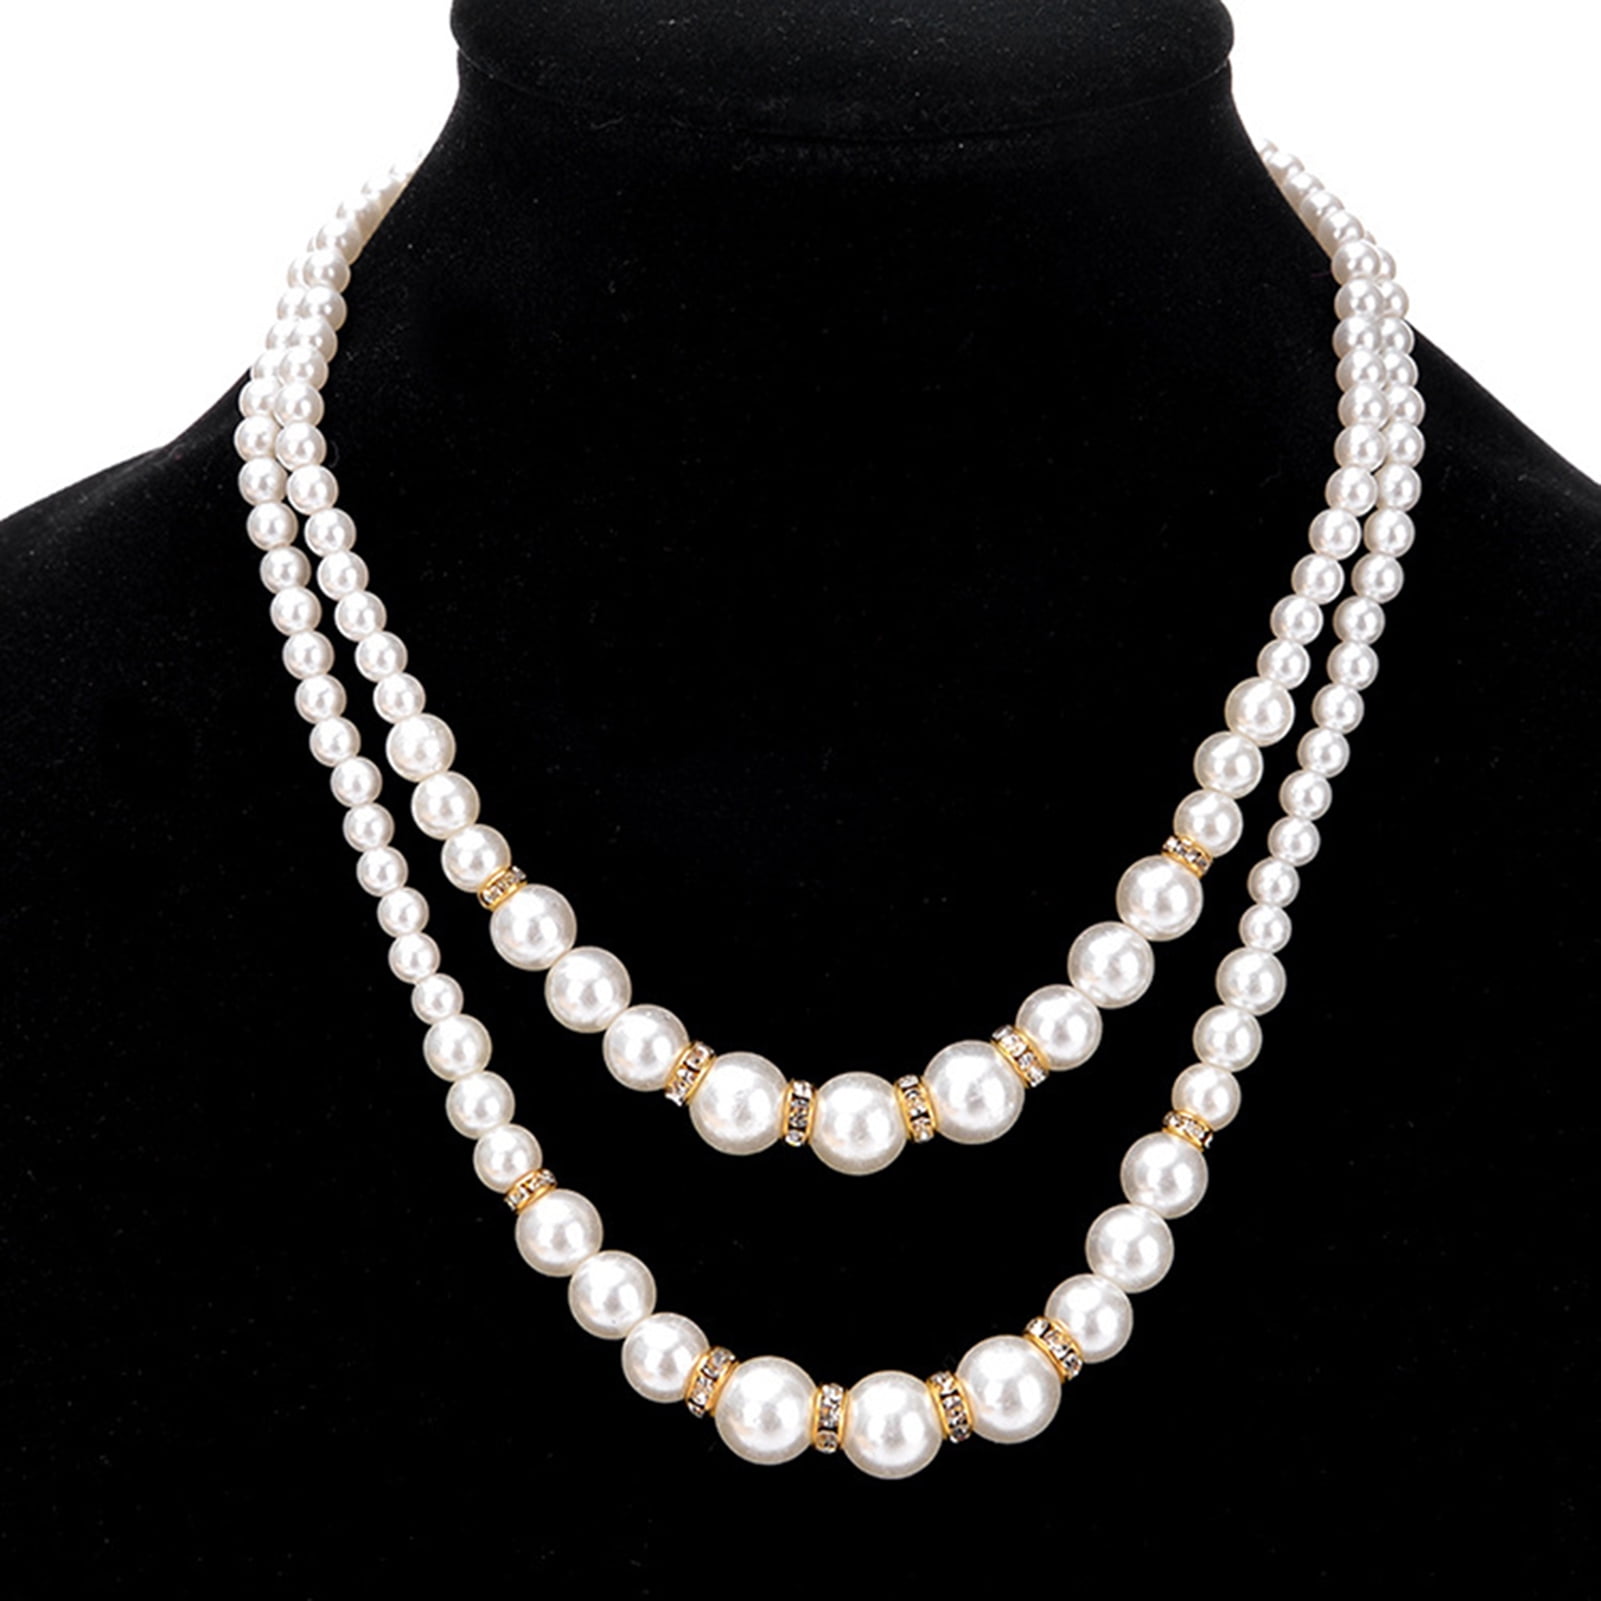 Handmade Adjustable Pearl Back Necklace with Lariat Dangles - – Bride Savvy  LLC -Your Bride Box